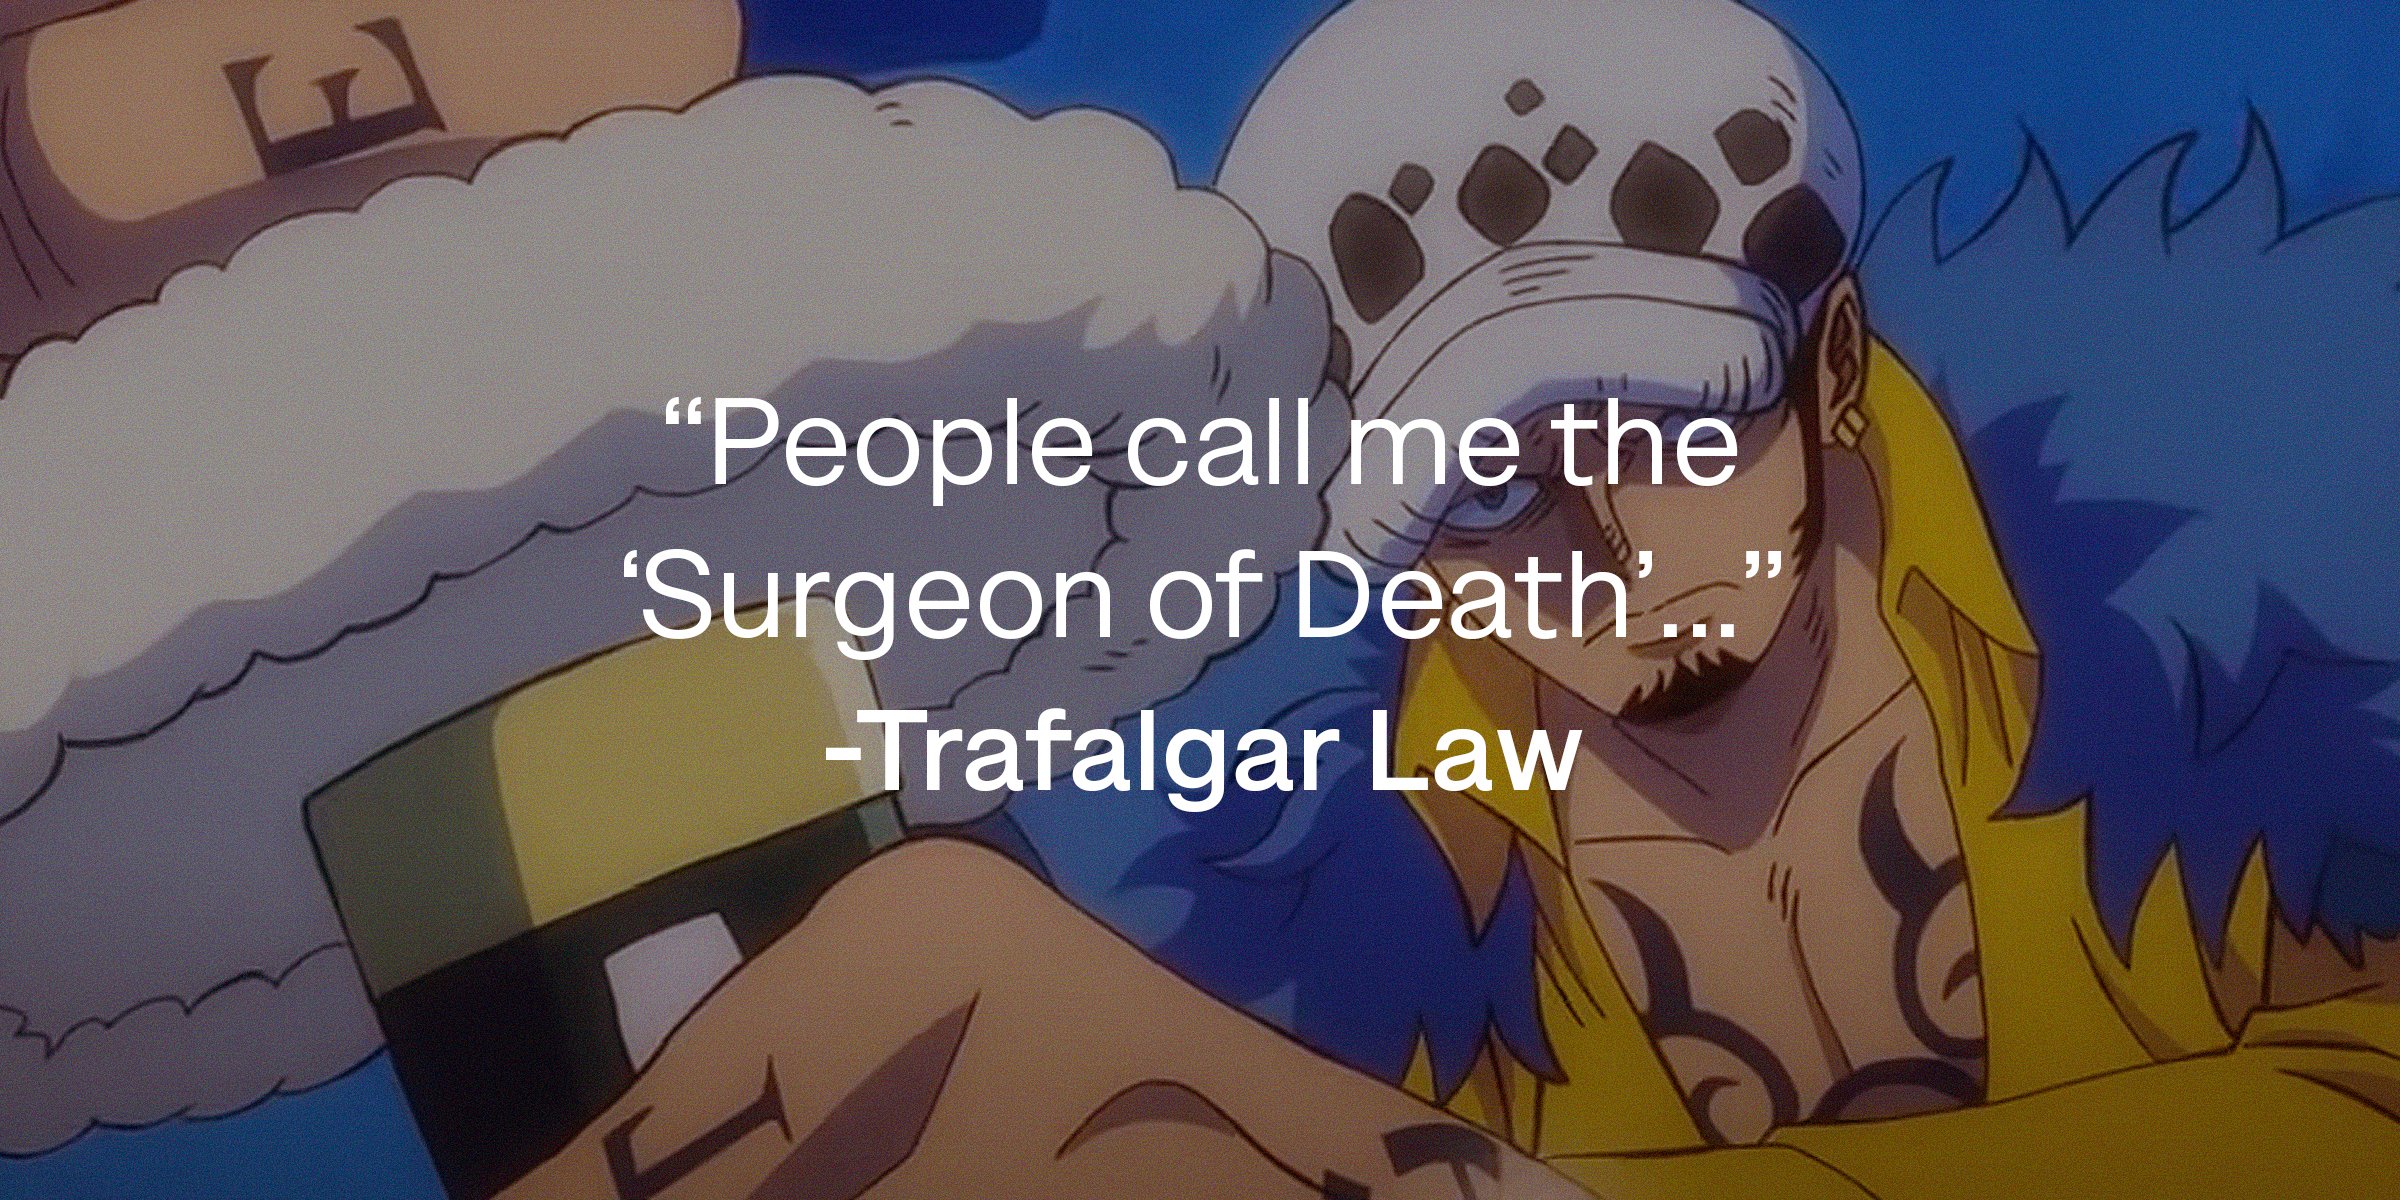 Source: youtube.com/Crunchyroll Collection | A picture of Trafalgar Law with a quote by him, reading, "People call me the ‘Surgeon of Death’..."